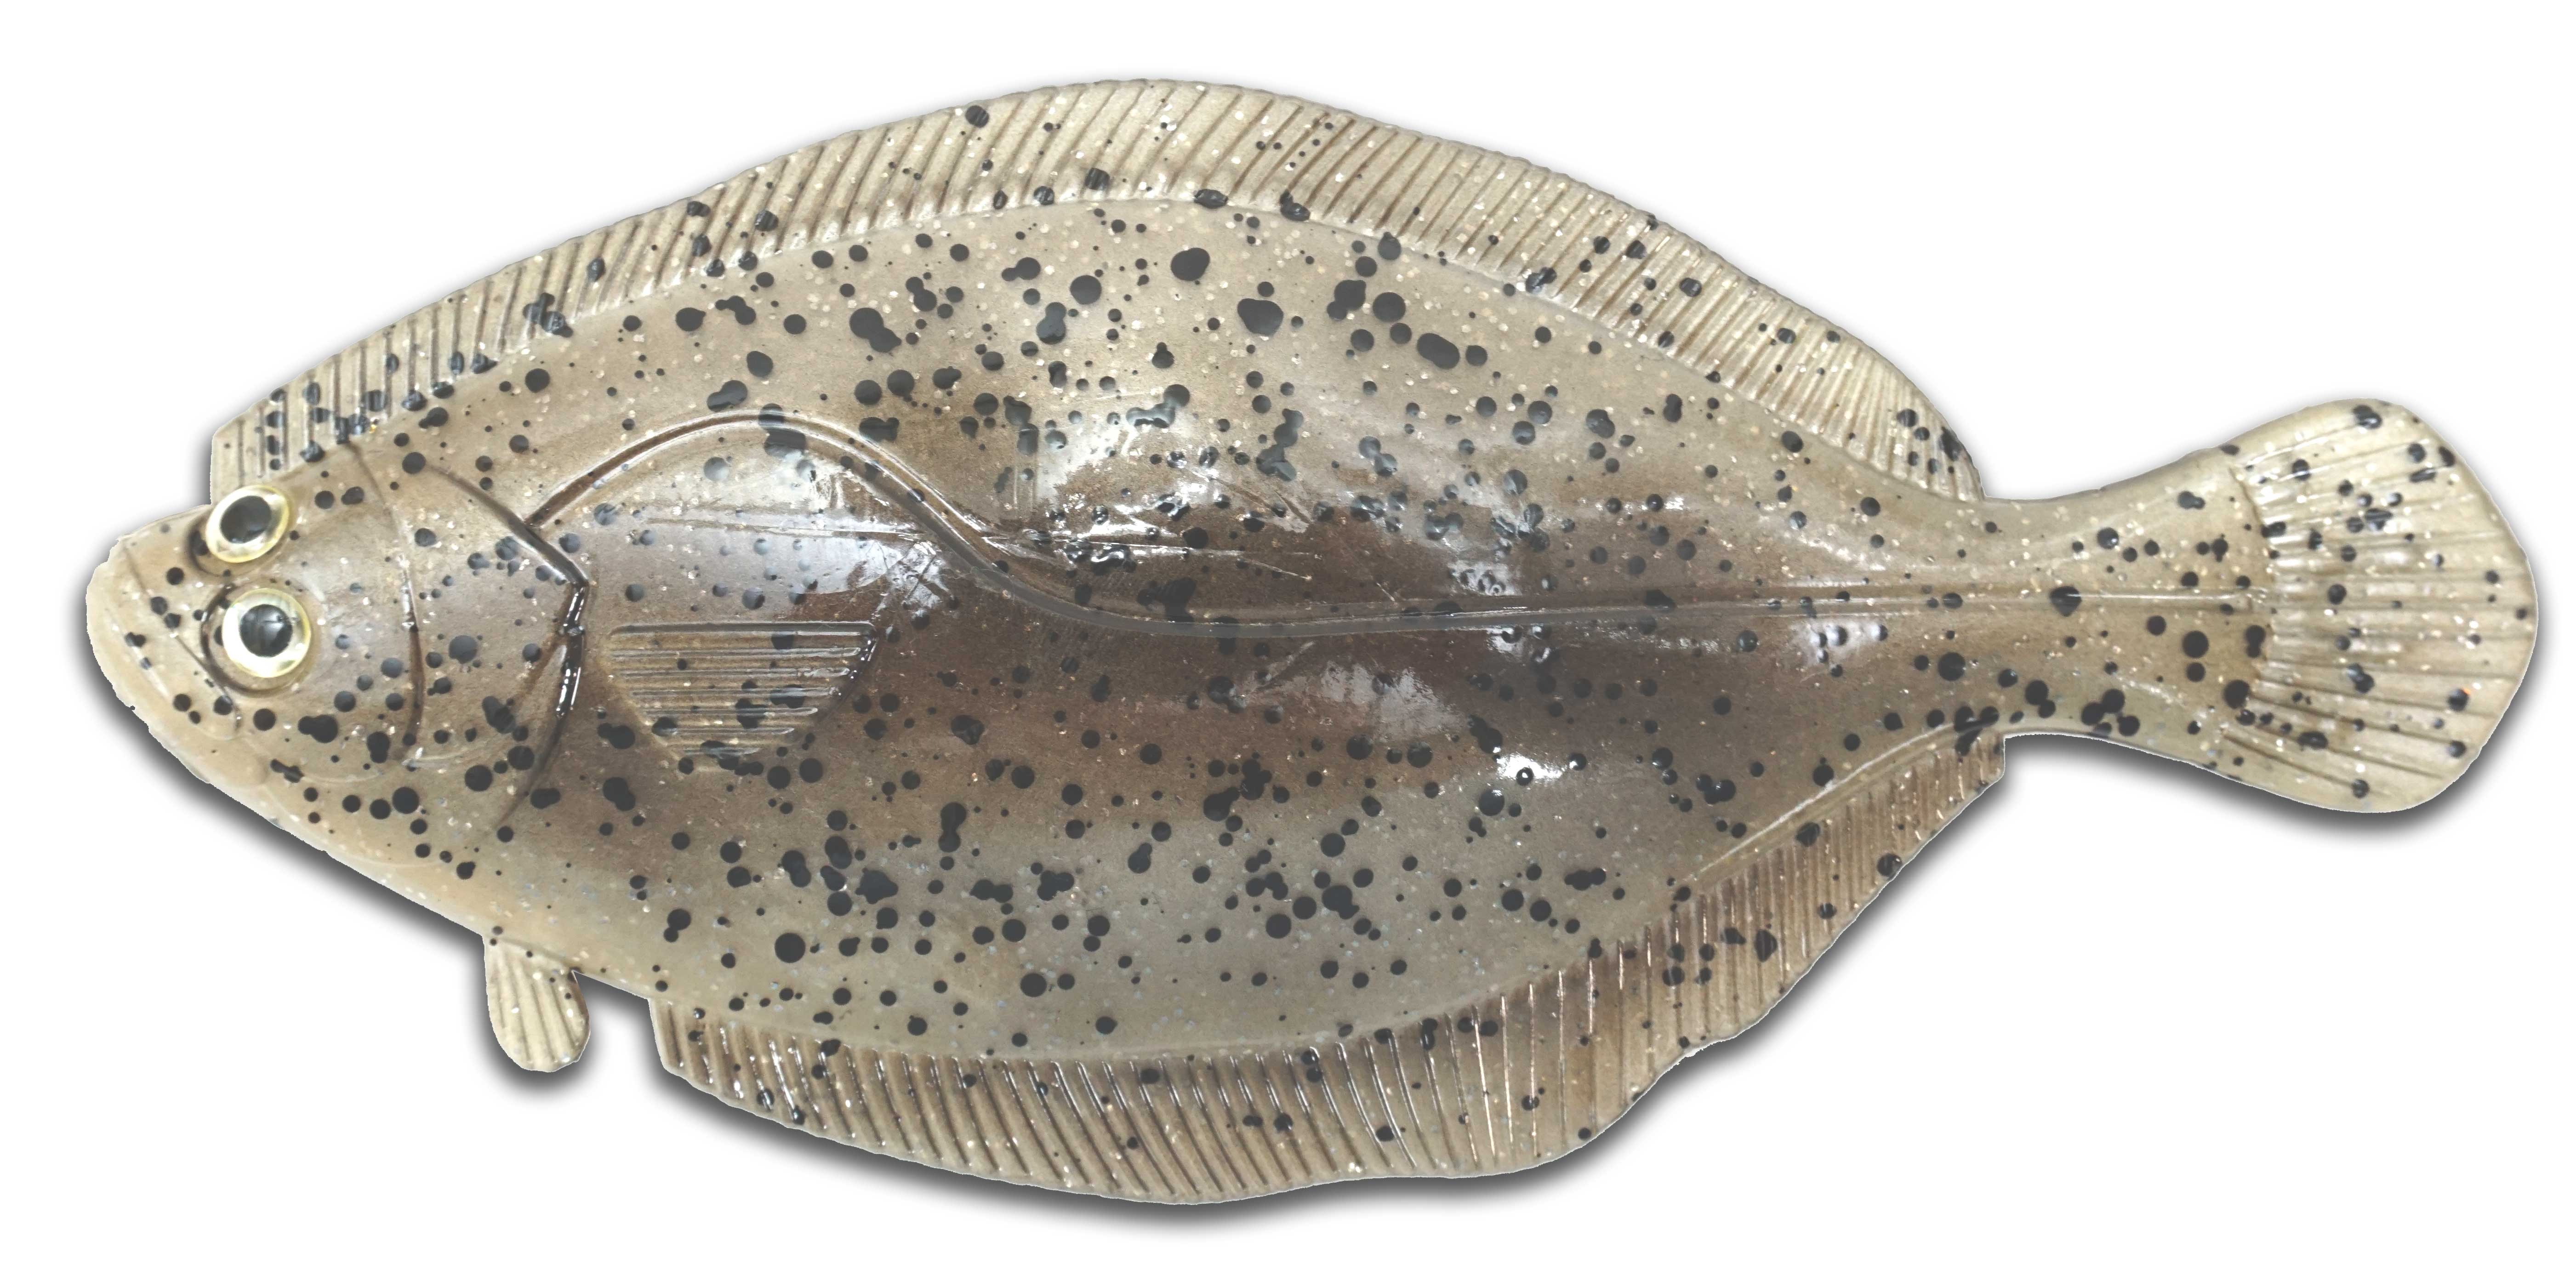 Artificial Flounder 8" Light Tan/Speckled - Almost Alive Lures - Click Image to Close